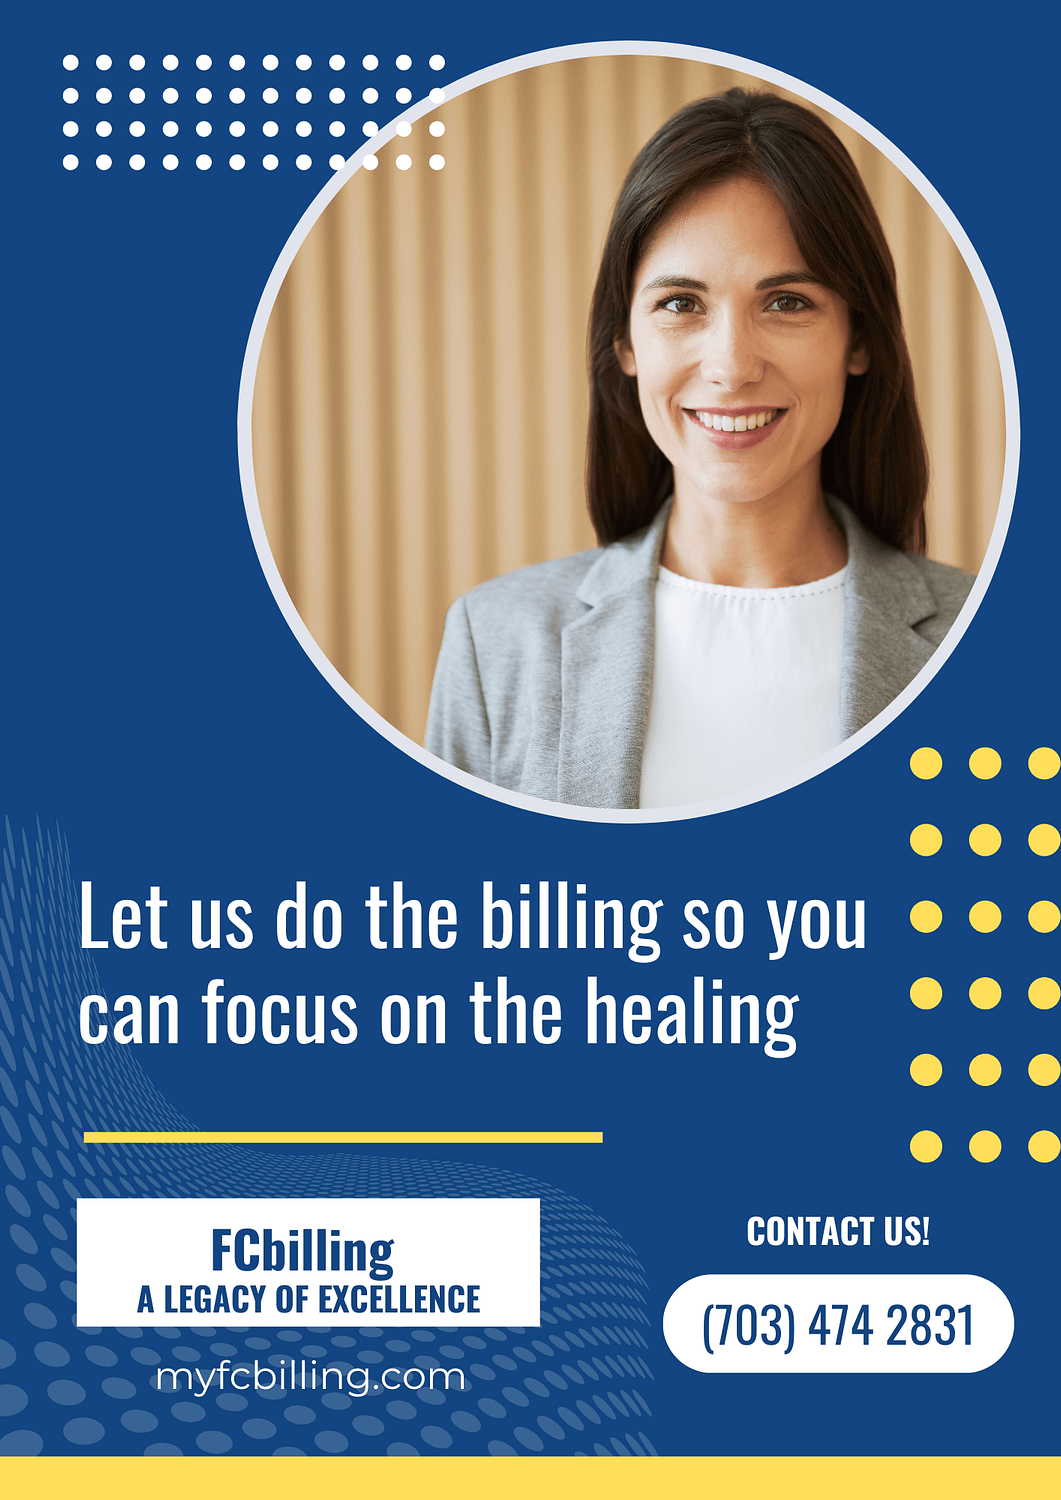 FCbilling is one of the most perfect medical billing companies in USA